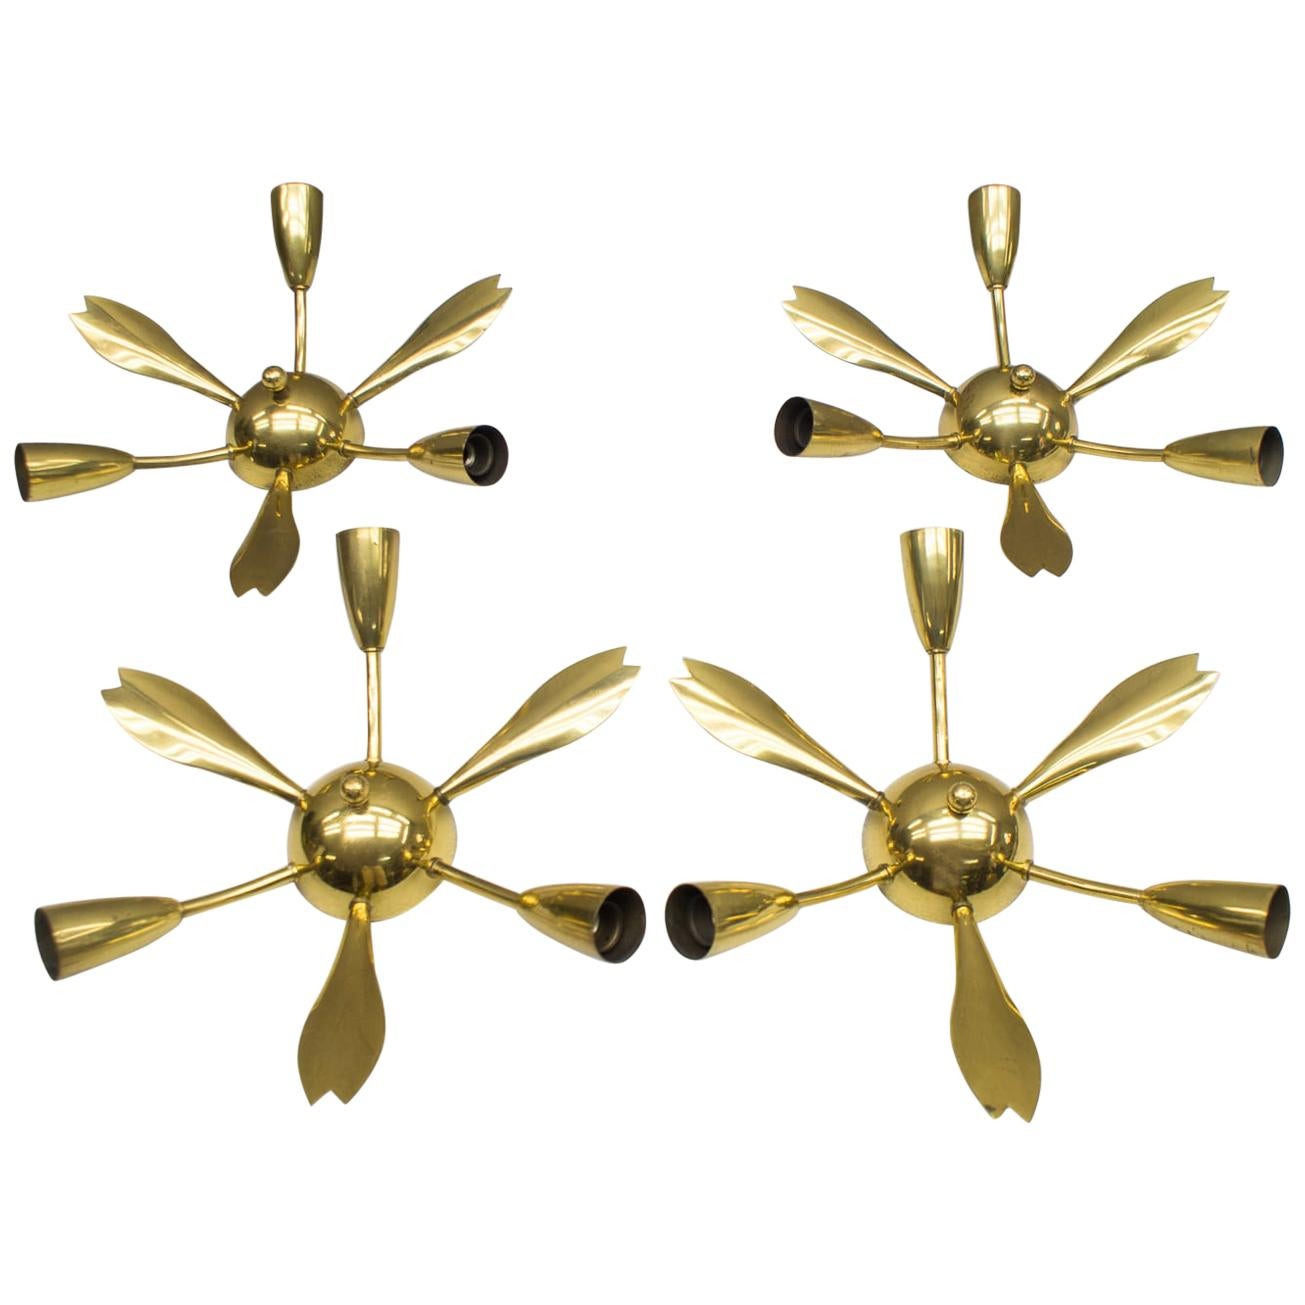 Set of Four Mid-Century Modern Brass Sputnik Wall or Ceiling Lamps, Italy, 1950s